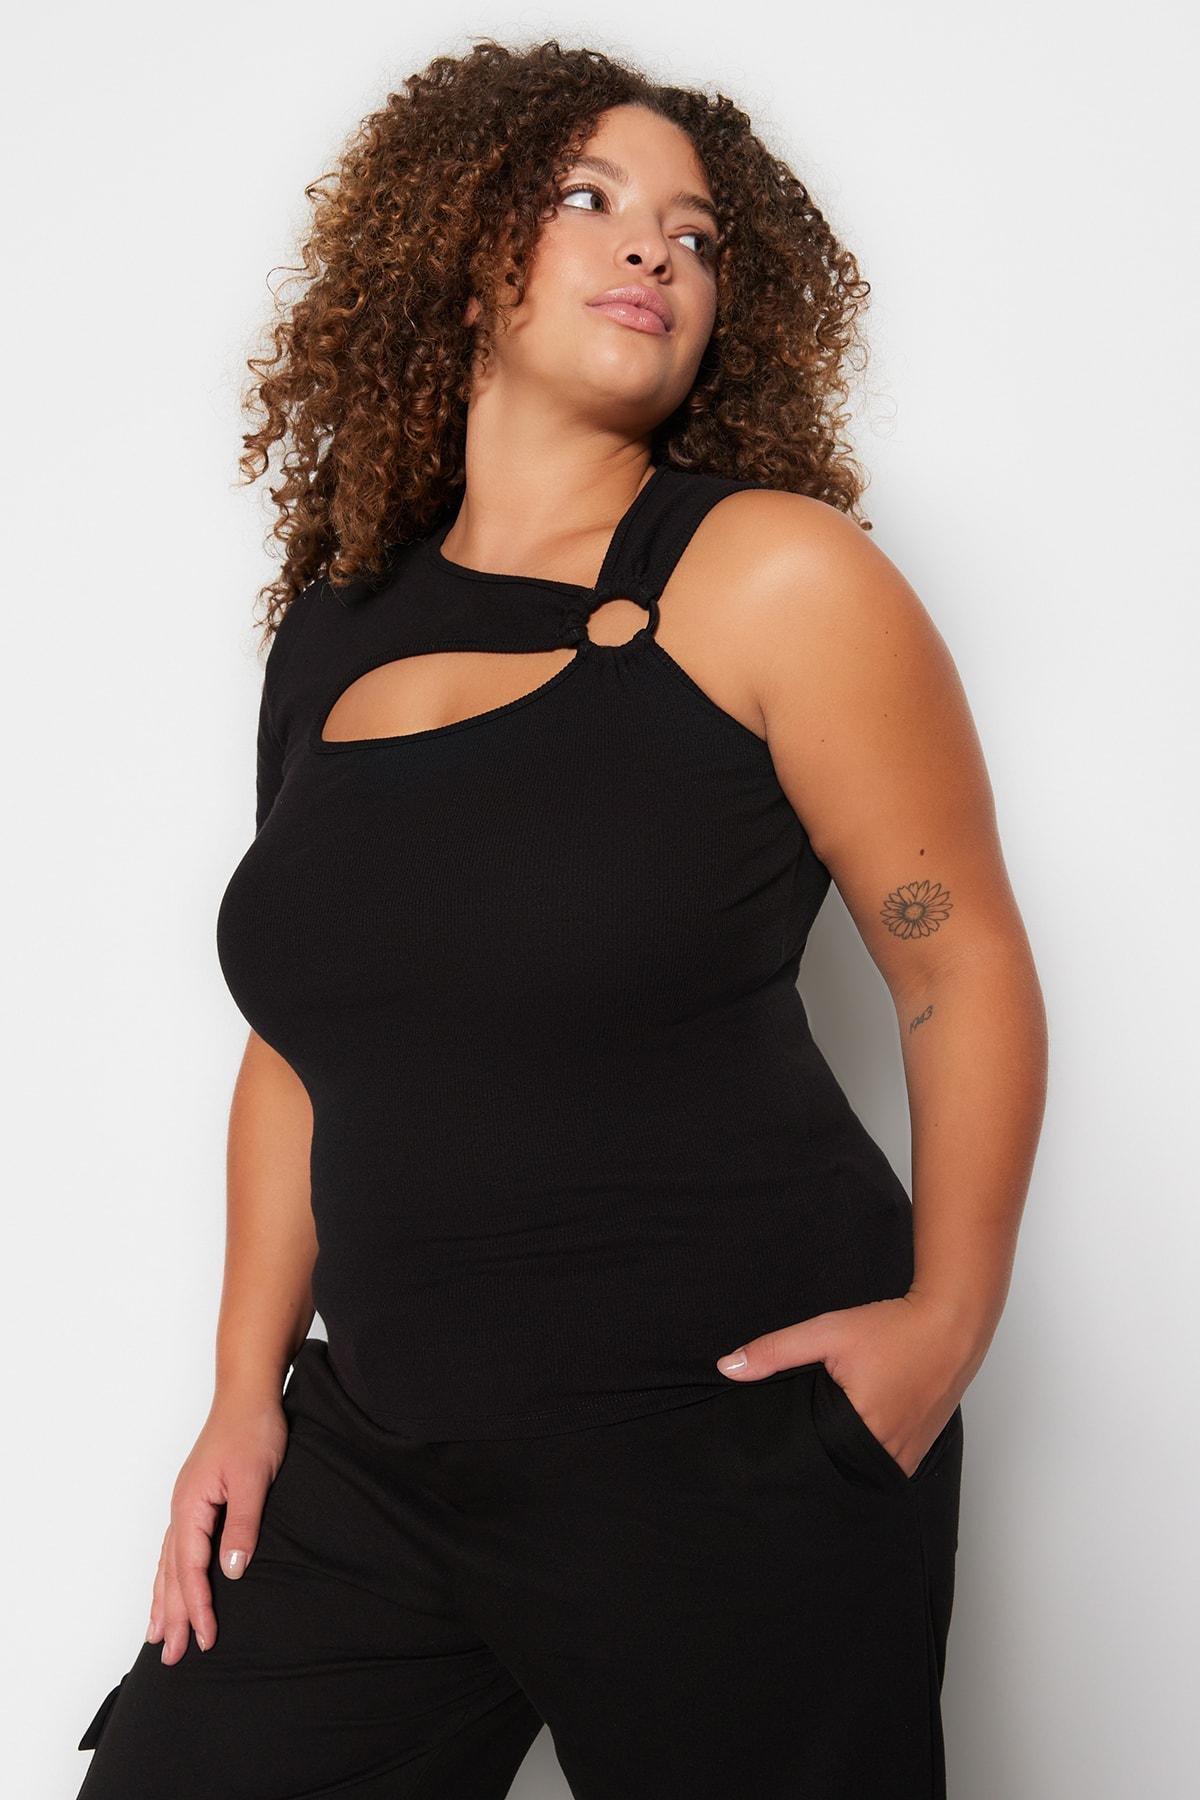 Trendyol - Black Fitted Plus Size Blouse